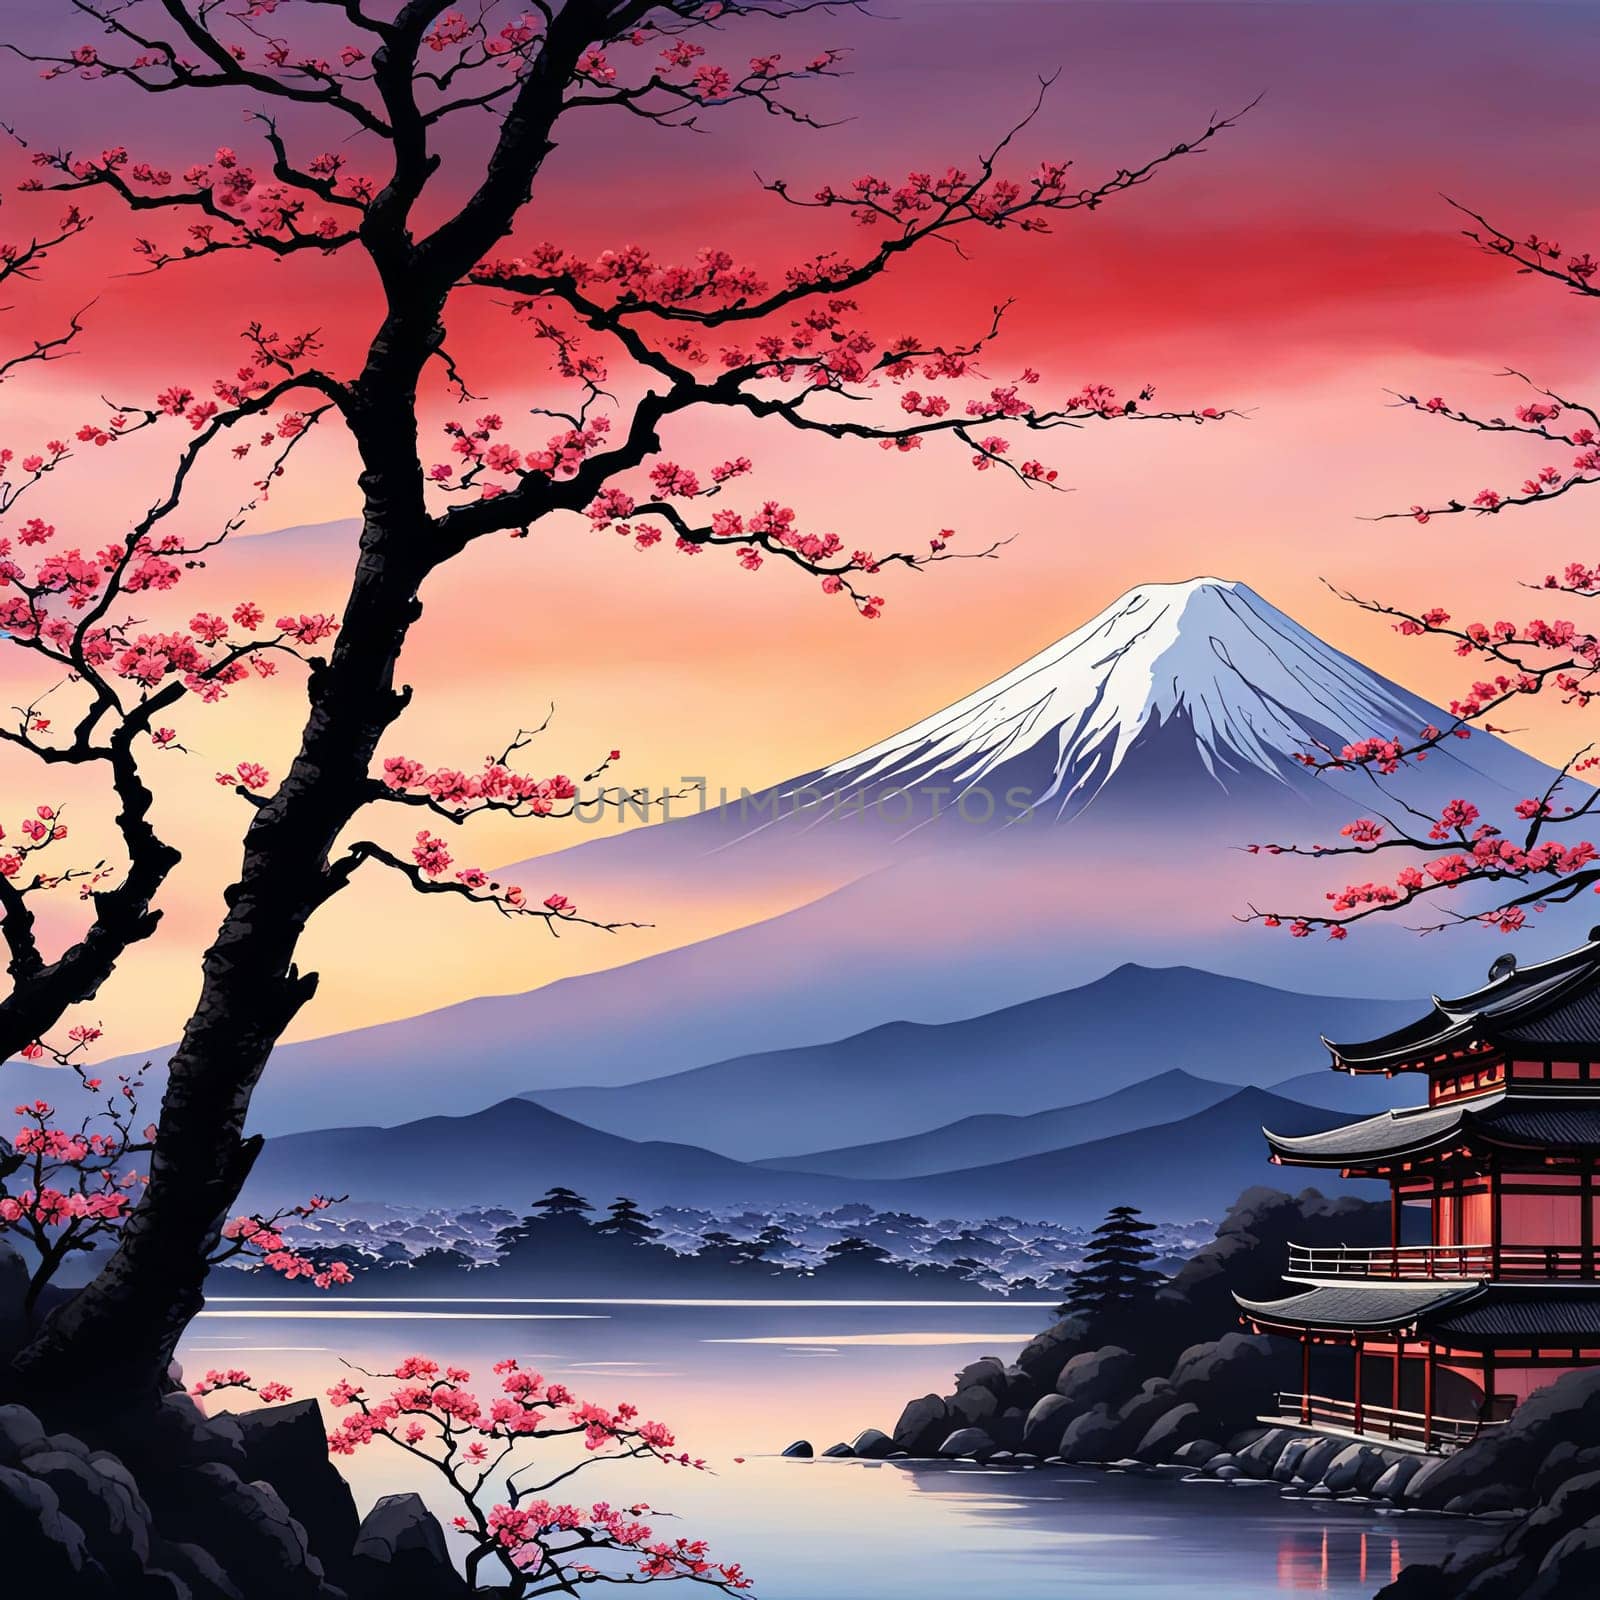 Japanese sunset over tranquil landscape, featuring traditional pagoda silhouetted against radiant sky. Blend of vibrant colors captures essence of peace. For art, creative projects, fashion, magazines